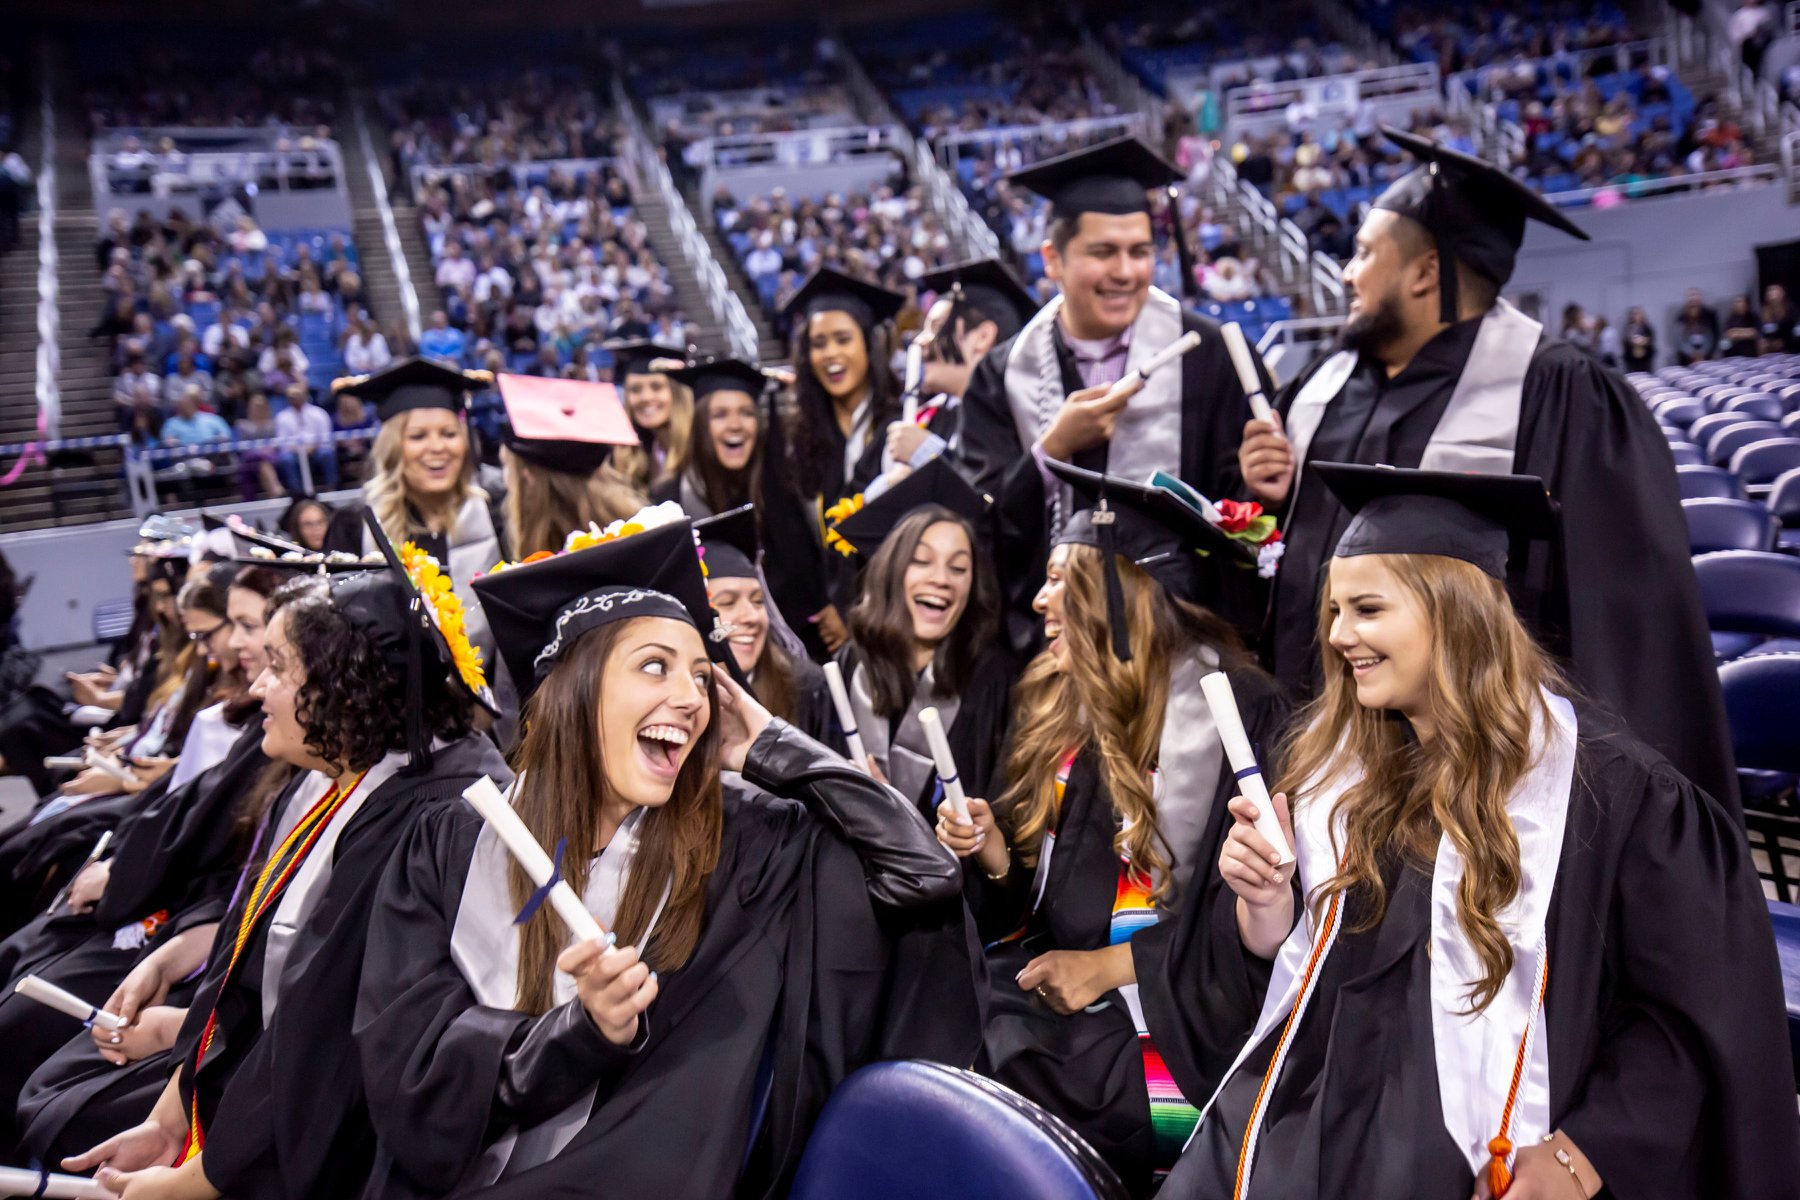 Recent graduates from the University of Nevada-Reno, smiling at one another after receiving diplomas.